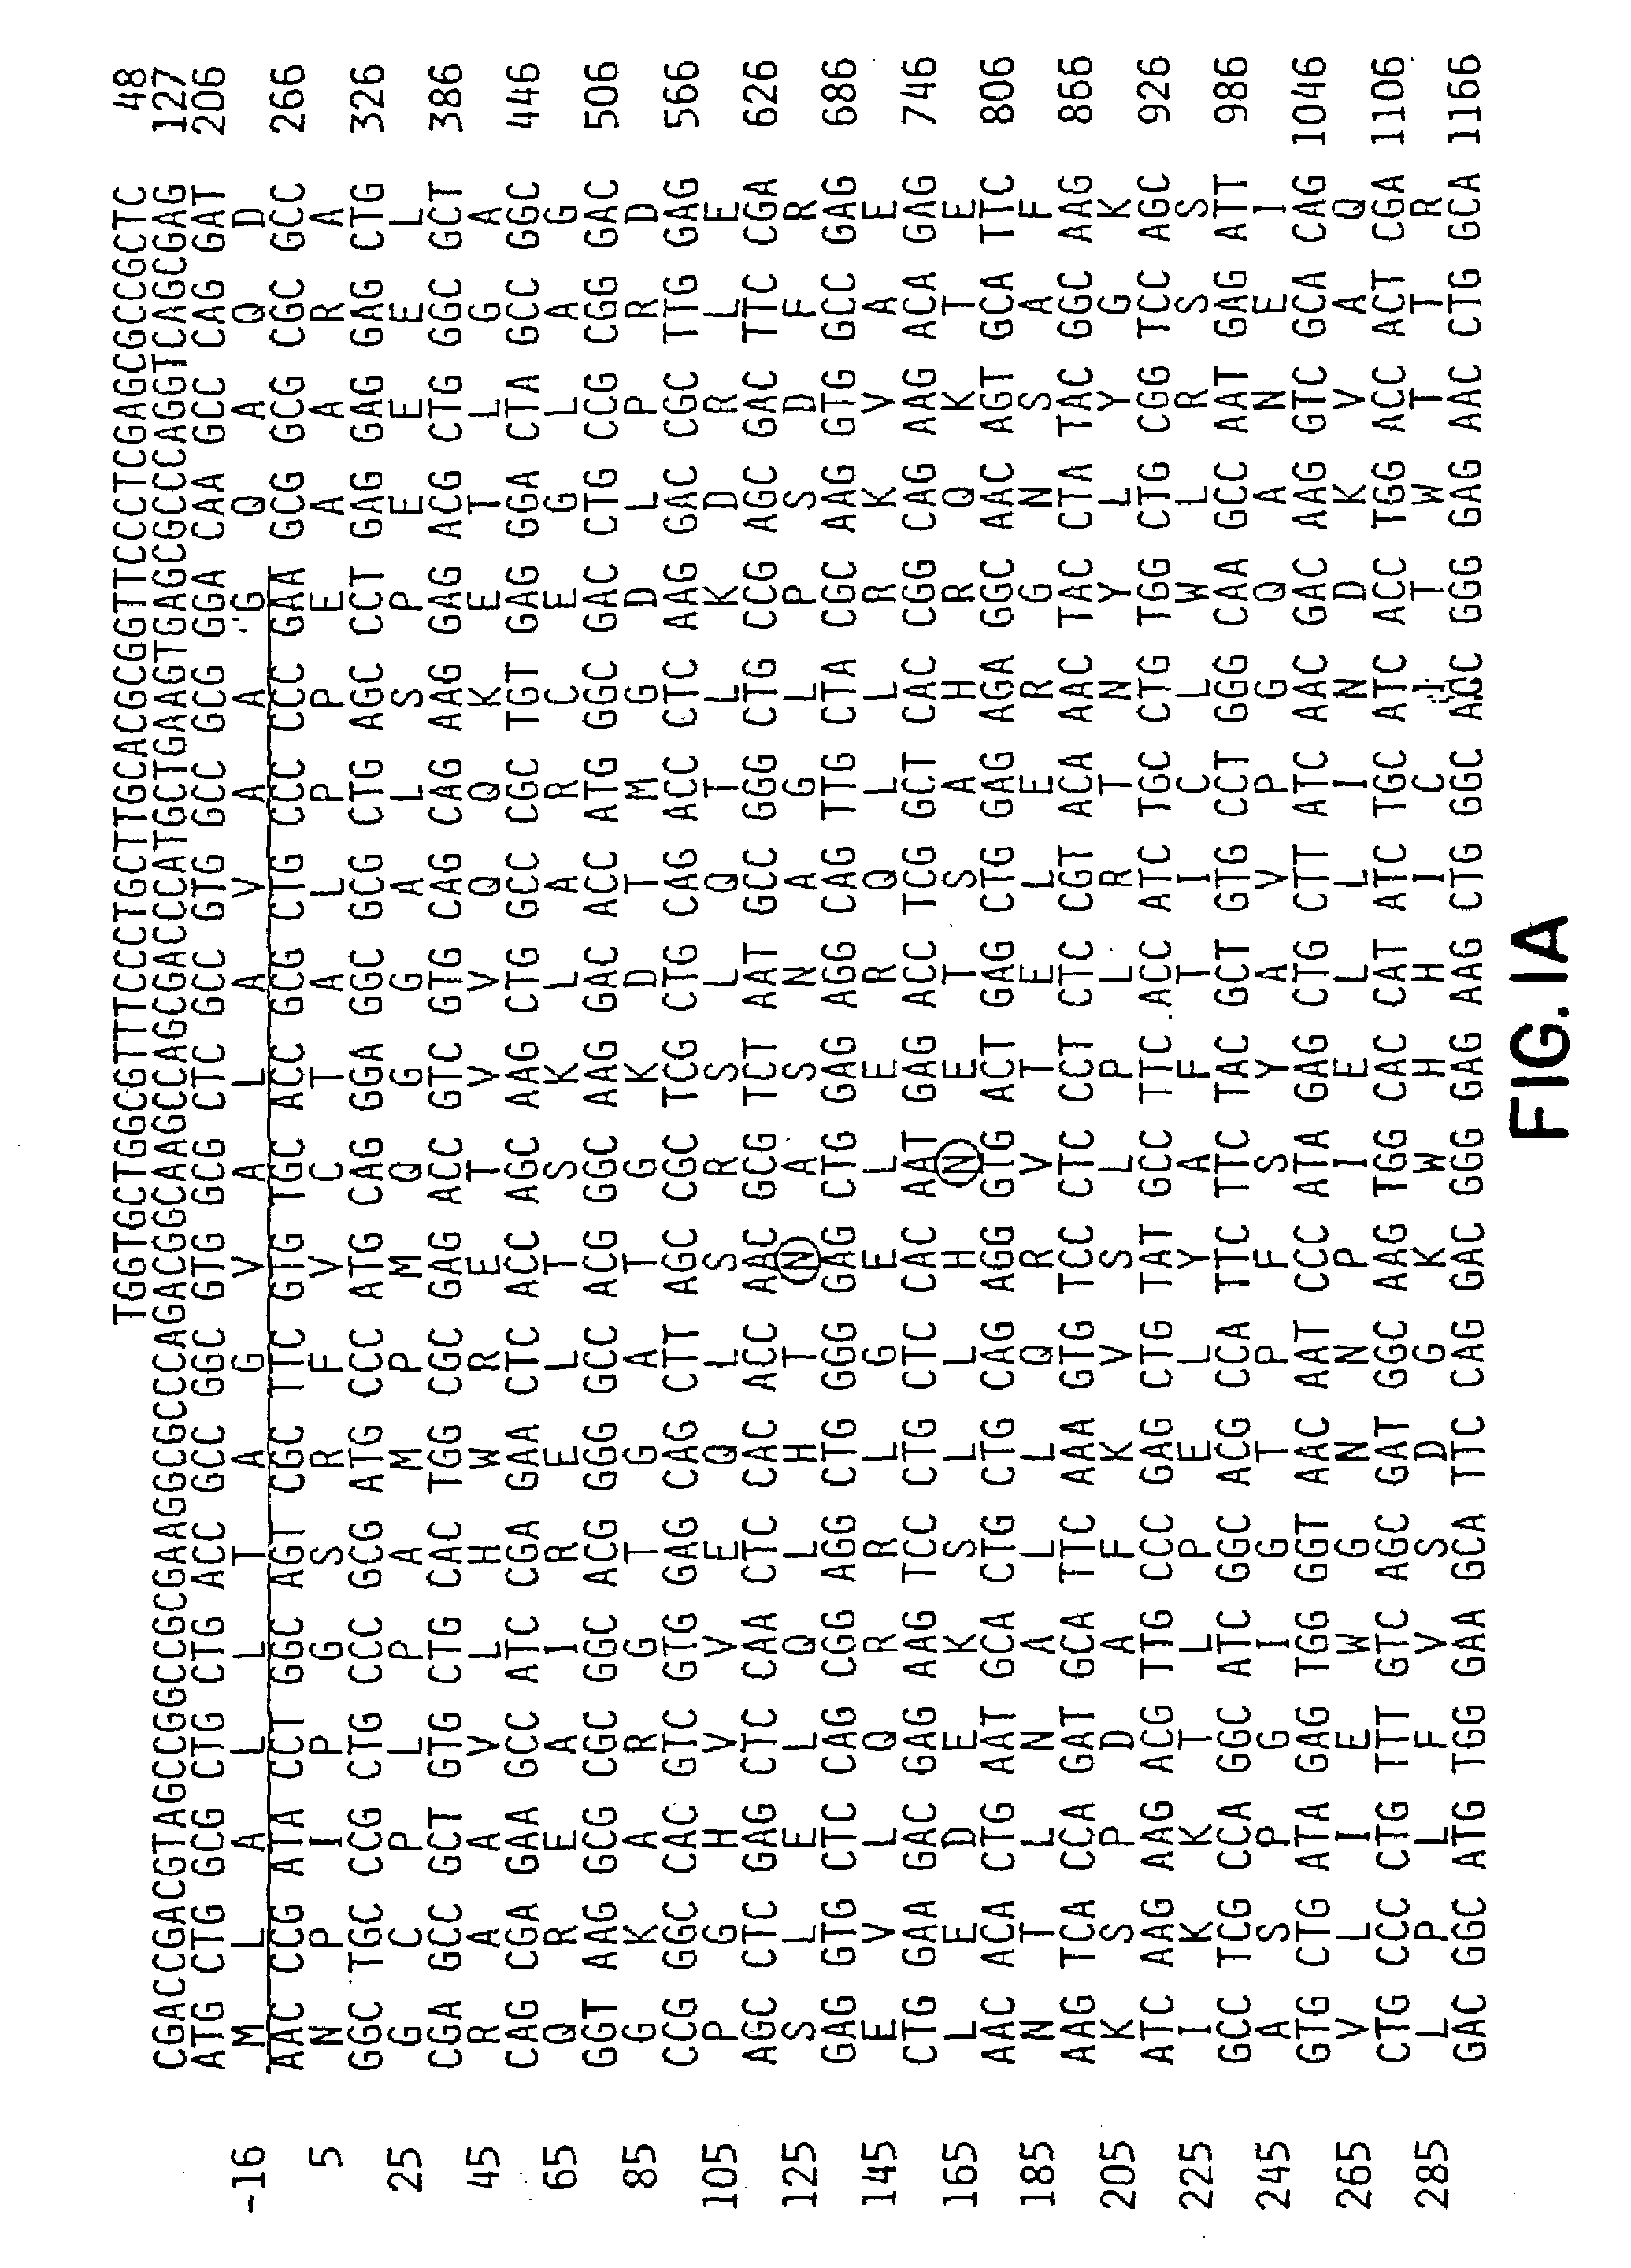 Method for identifying compounds which affect ionotropic glutamate receptor aggregation